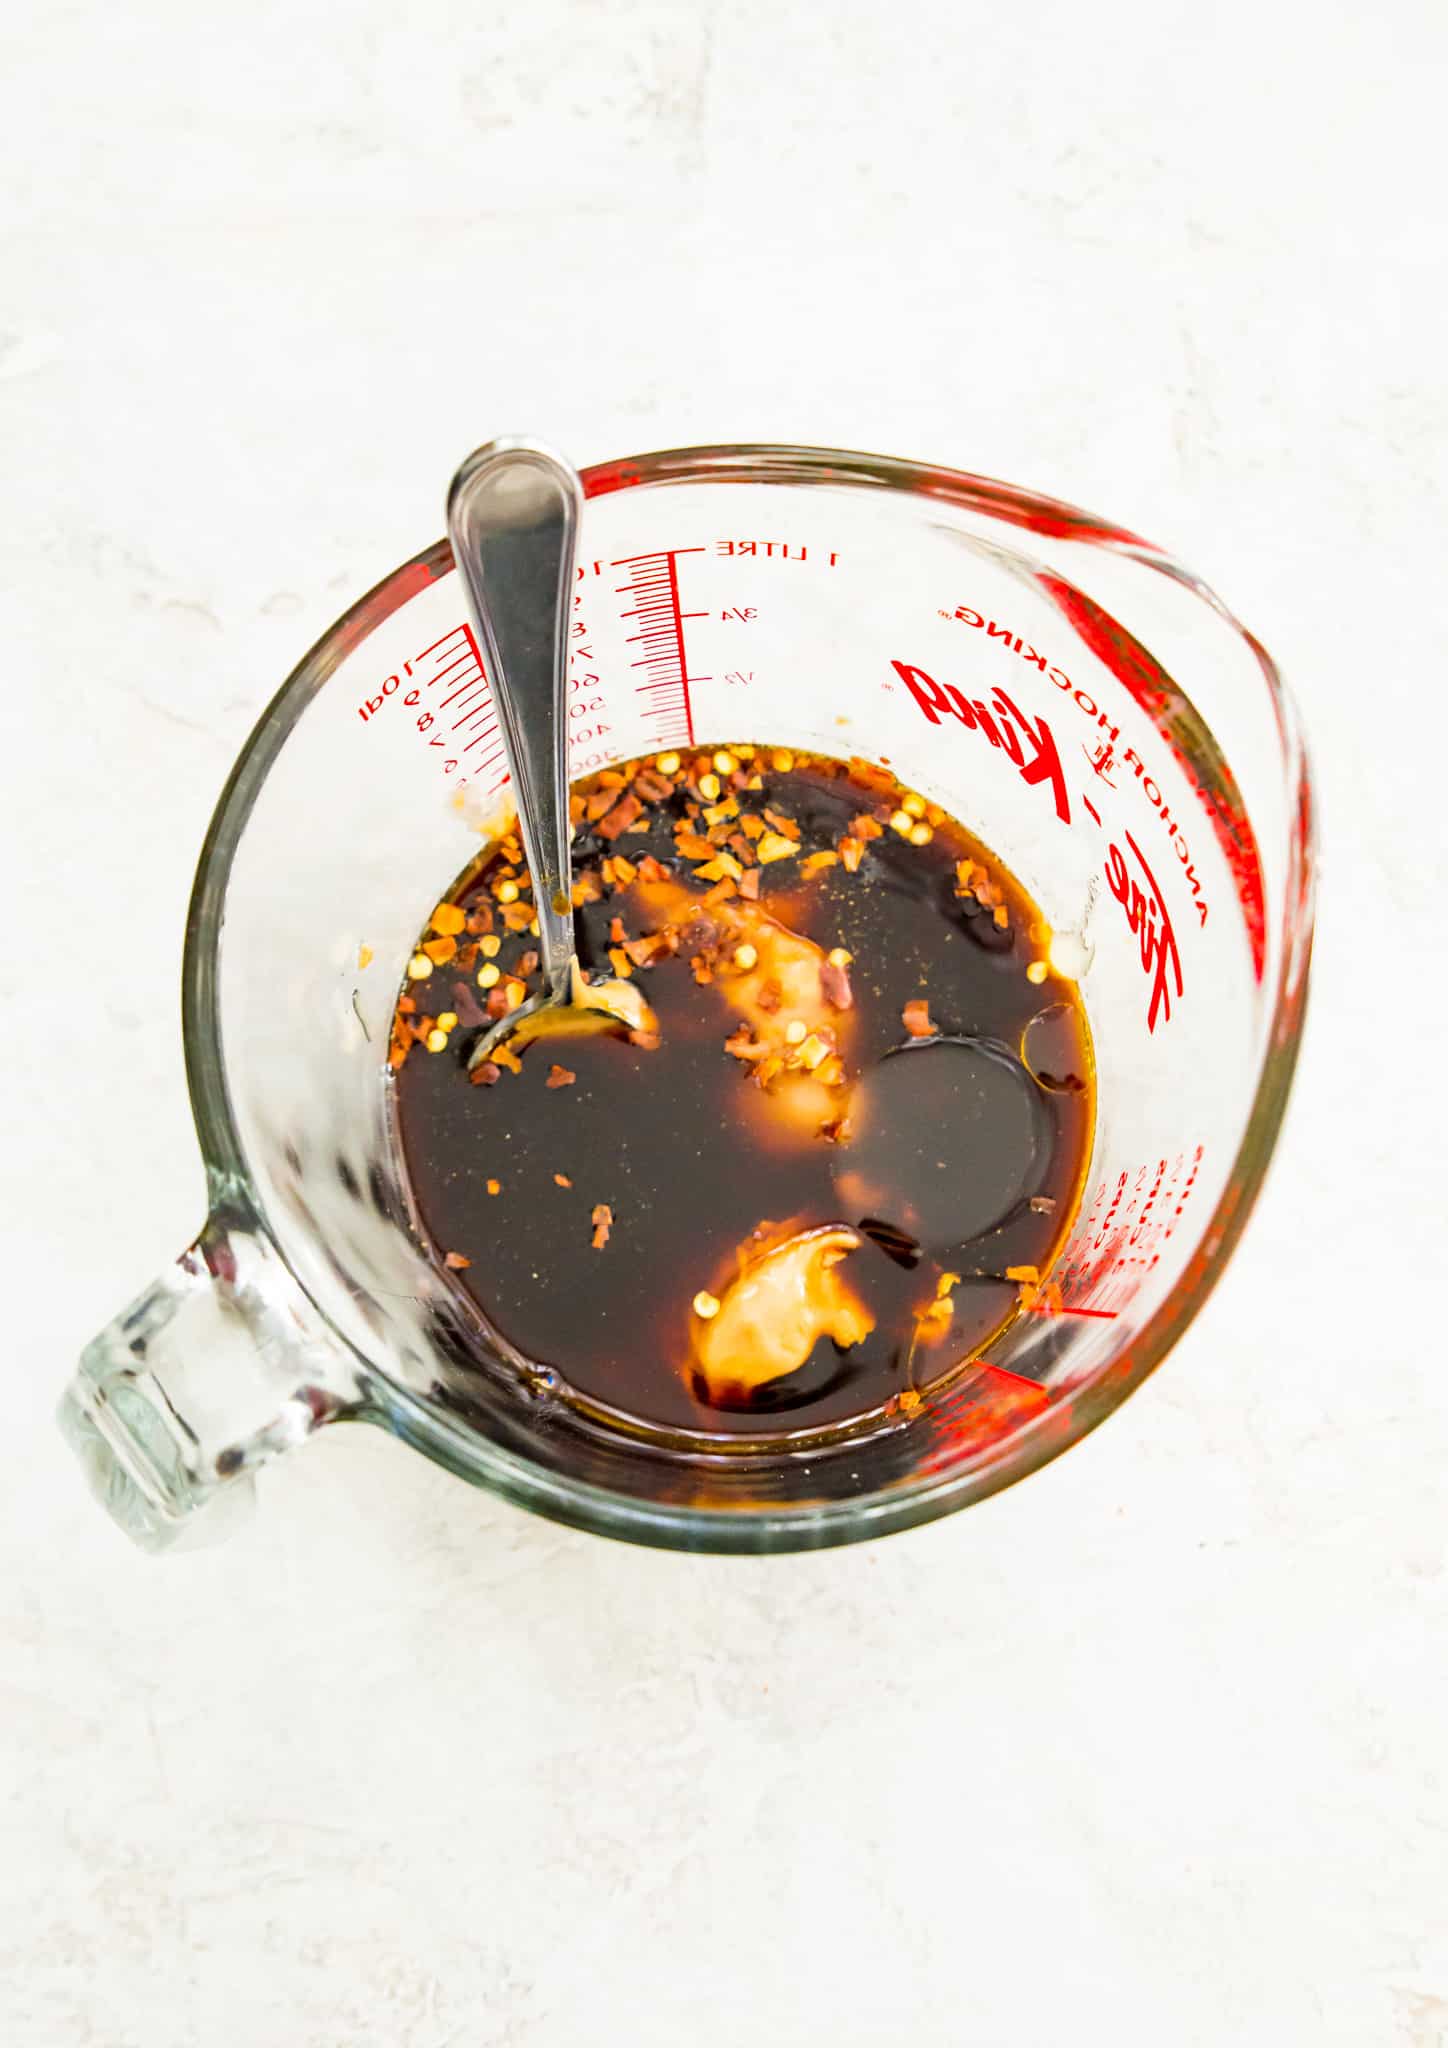 A measuring cup full of pad thai peanut sauce ingredients 